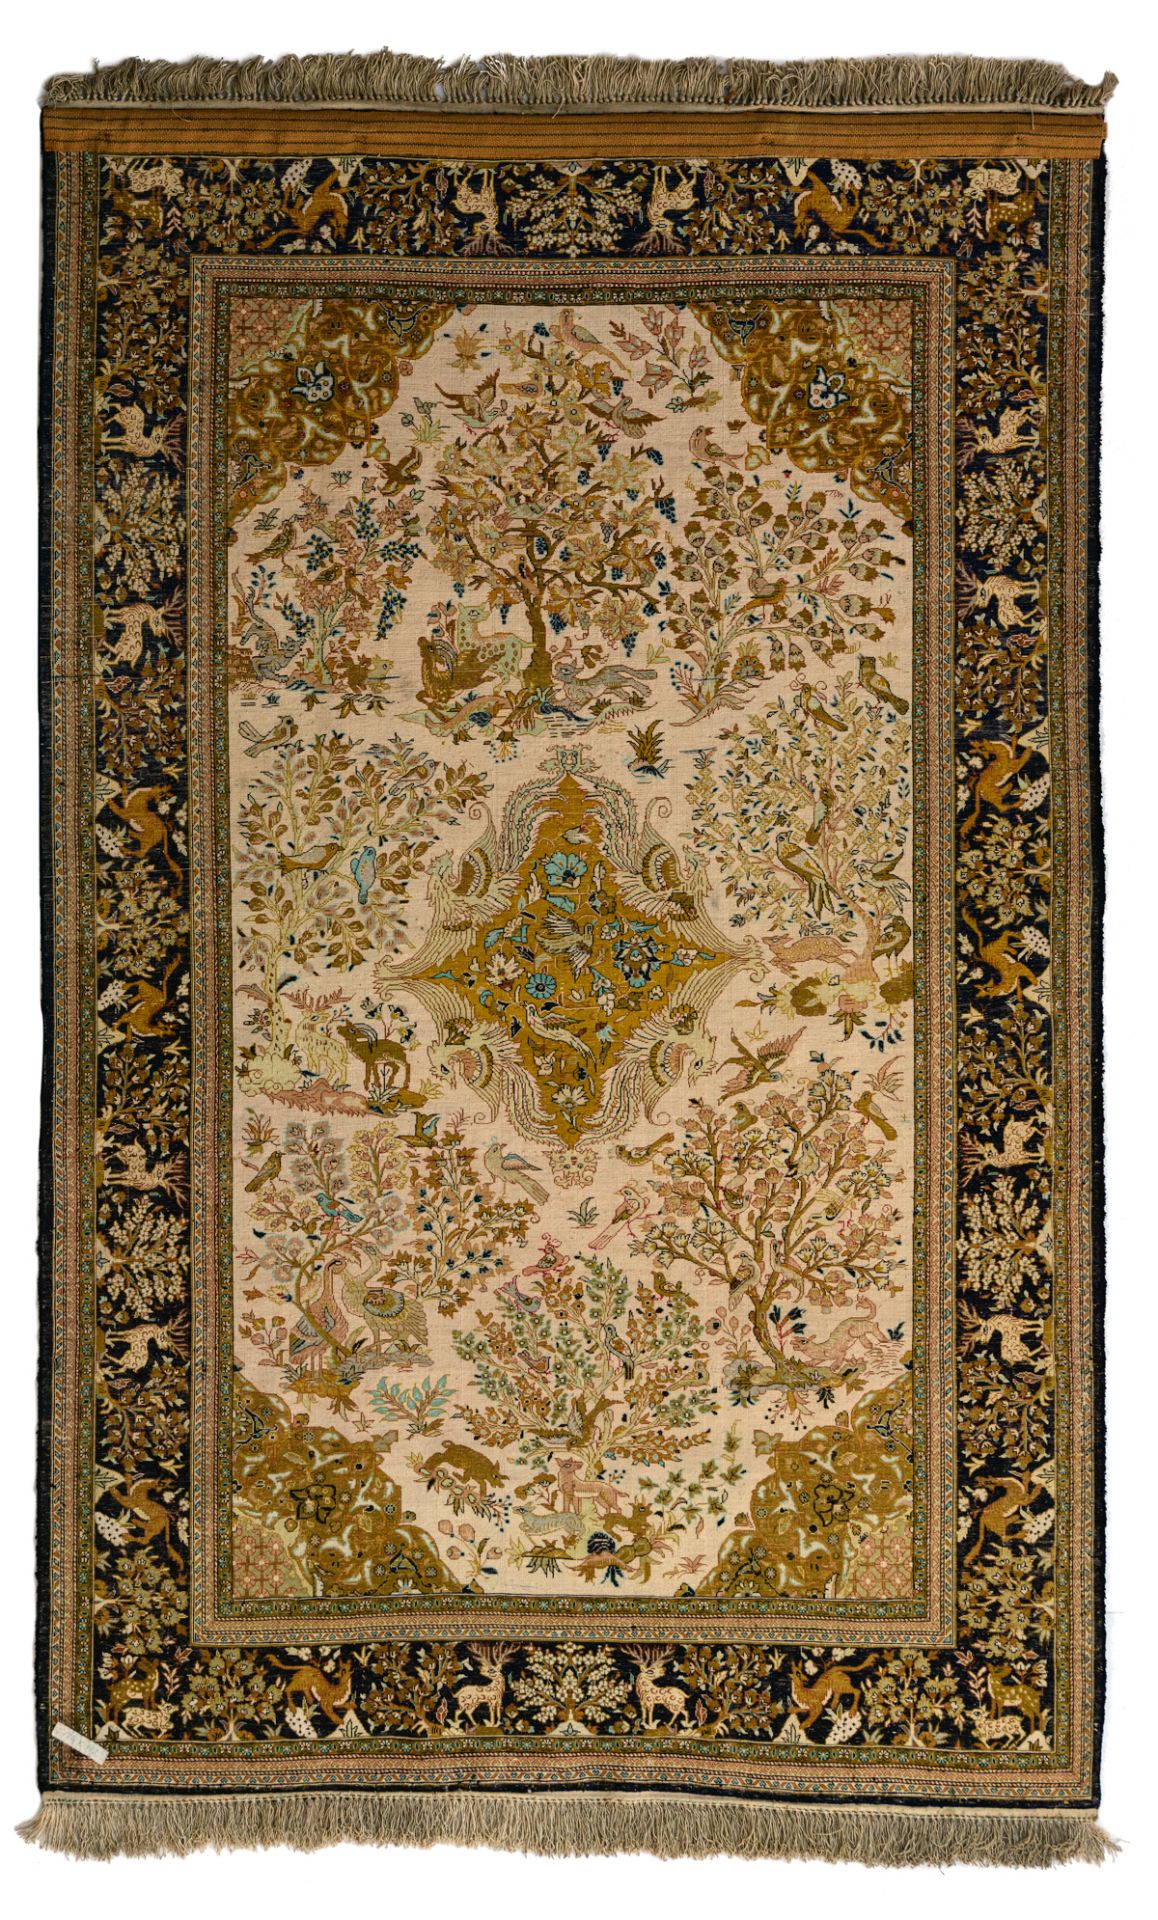 An Oriental silk rug depicting animals scenes in paradise, 145 x 227 cm - Image 2 of 6